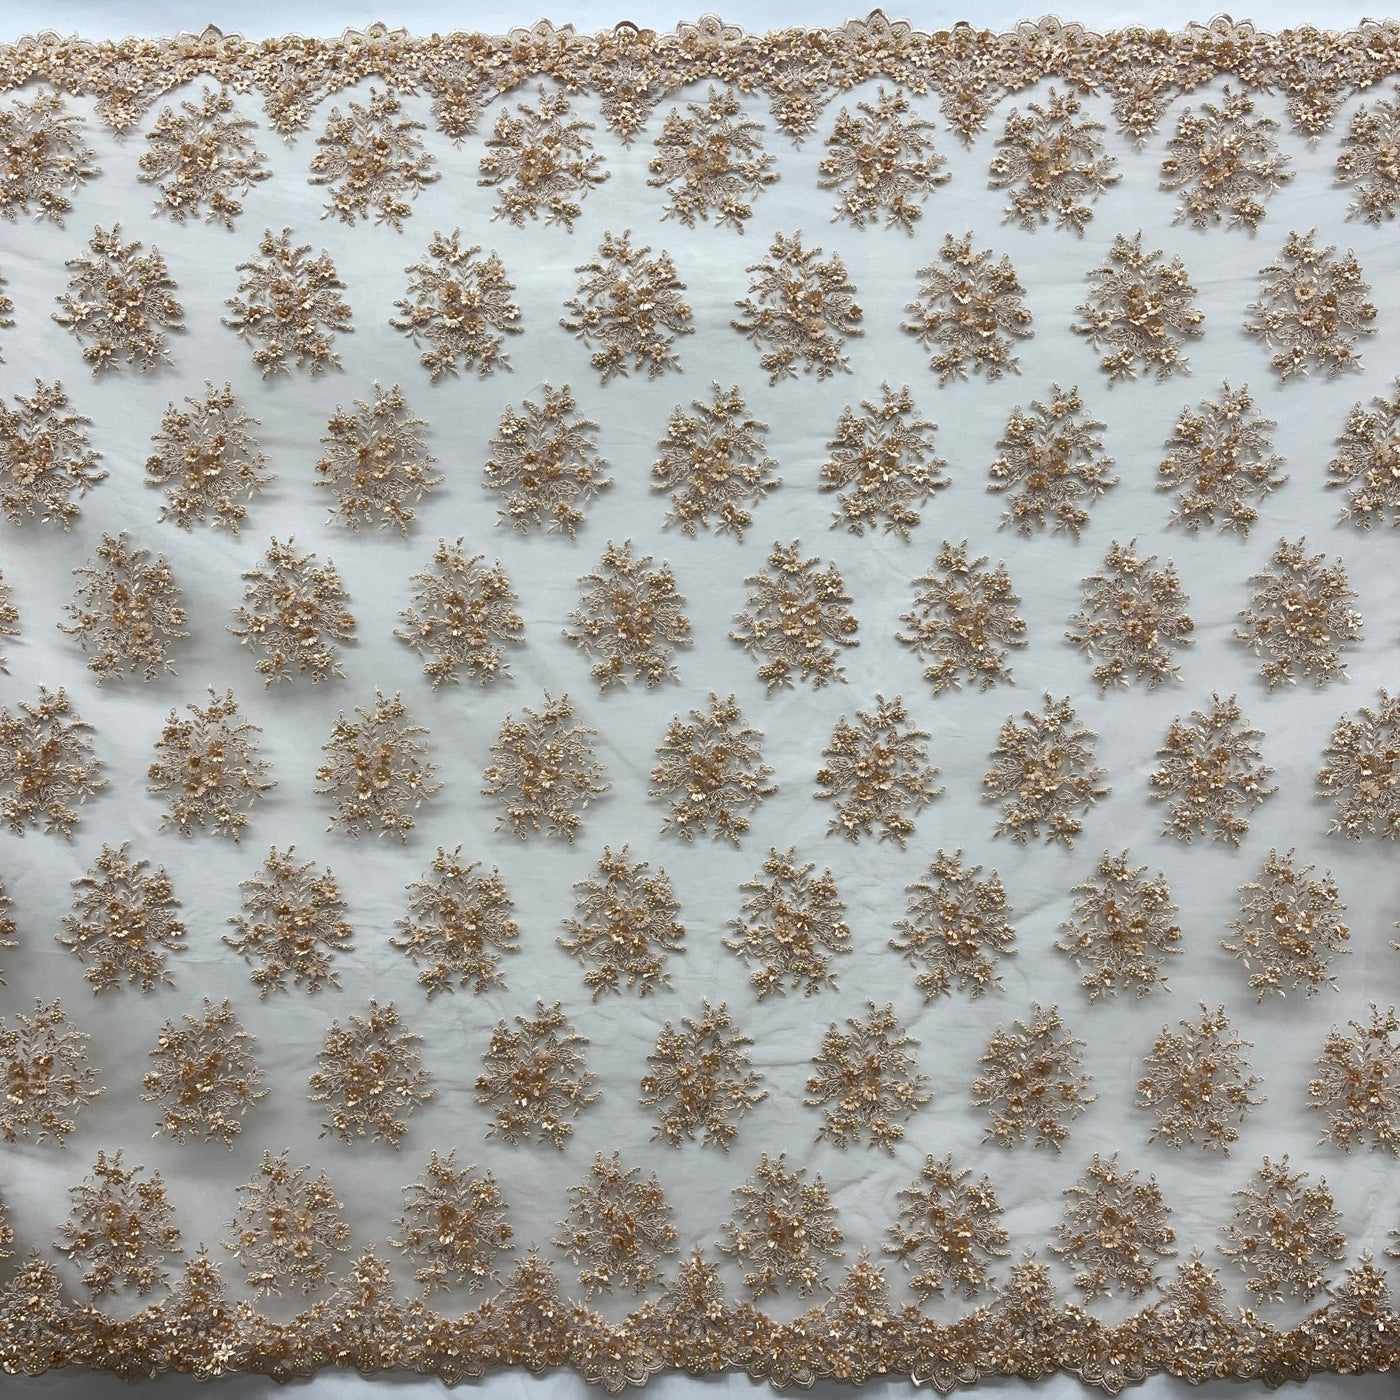 Beaded 3D Floral Lace Fabric Embroidered on 100% Polyester Net Mesh | Lace USA - GD-361